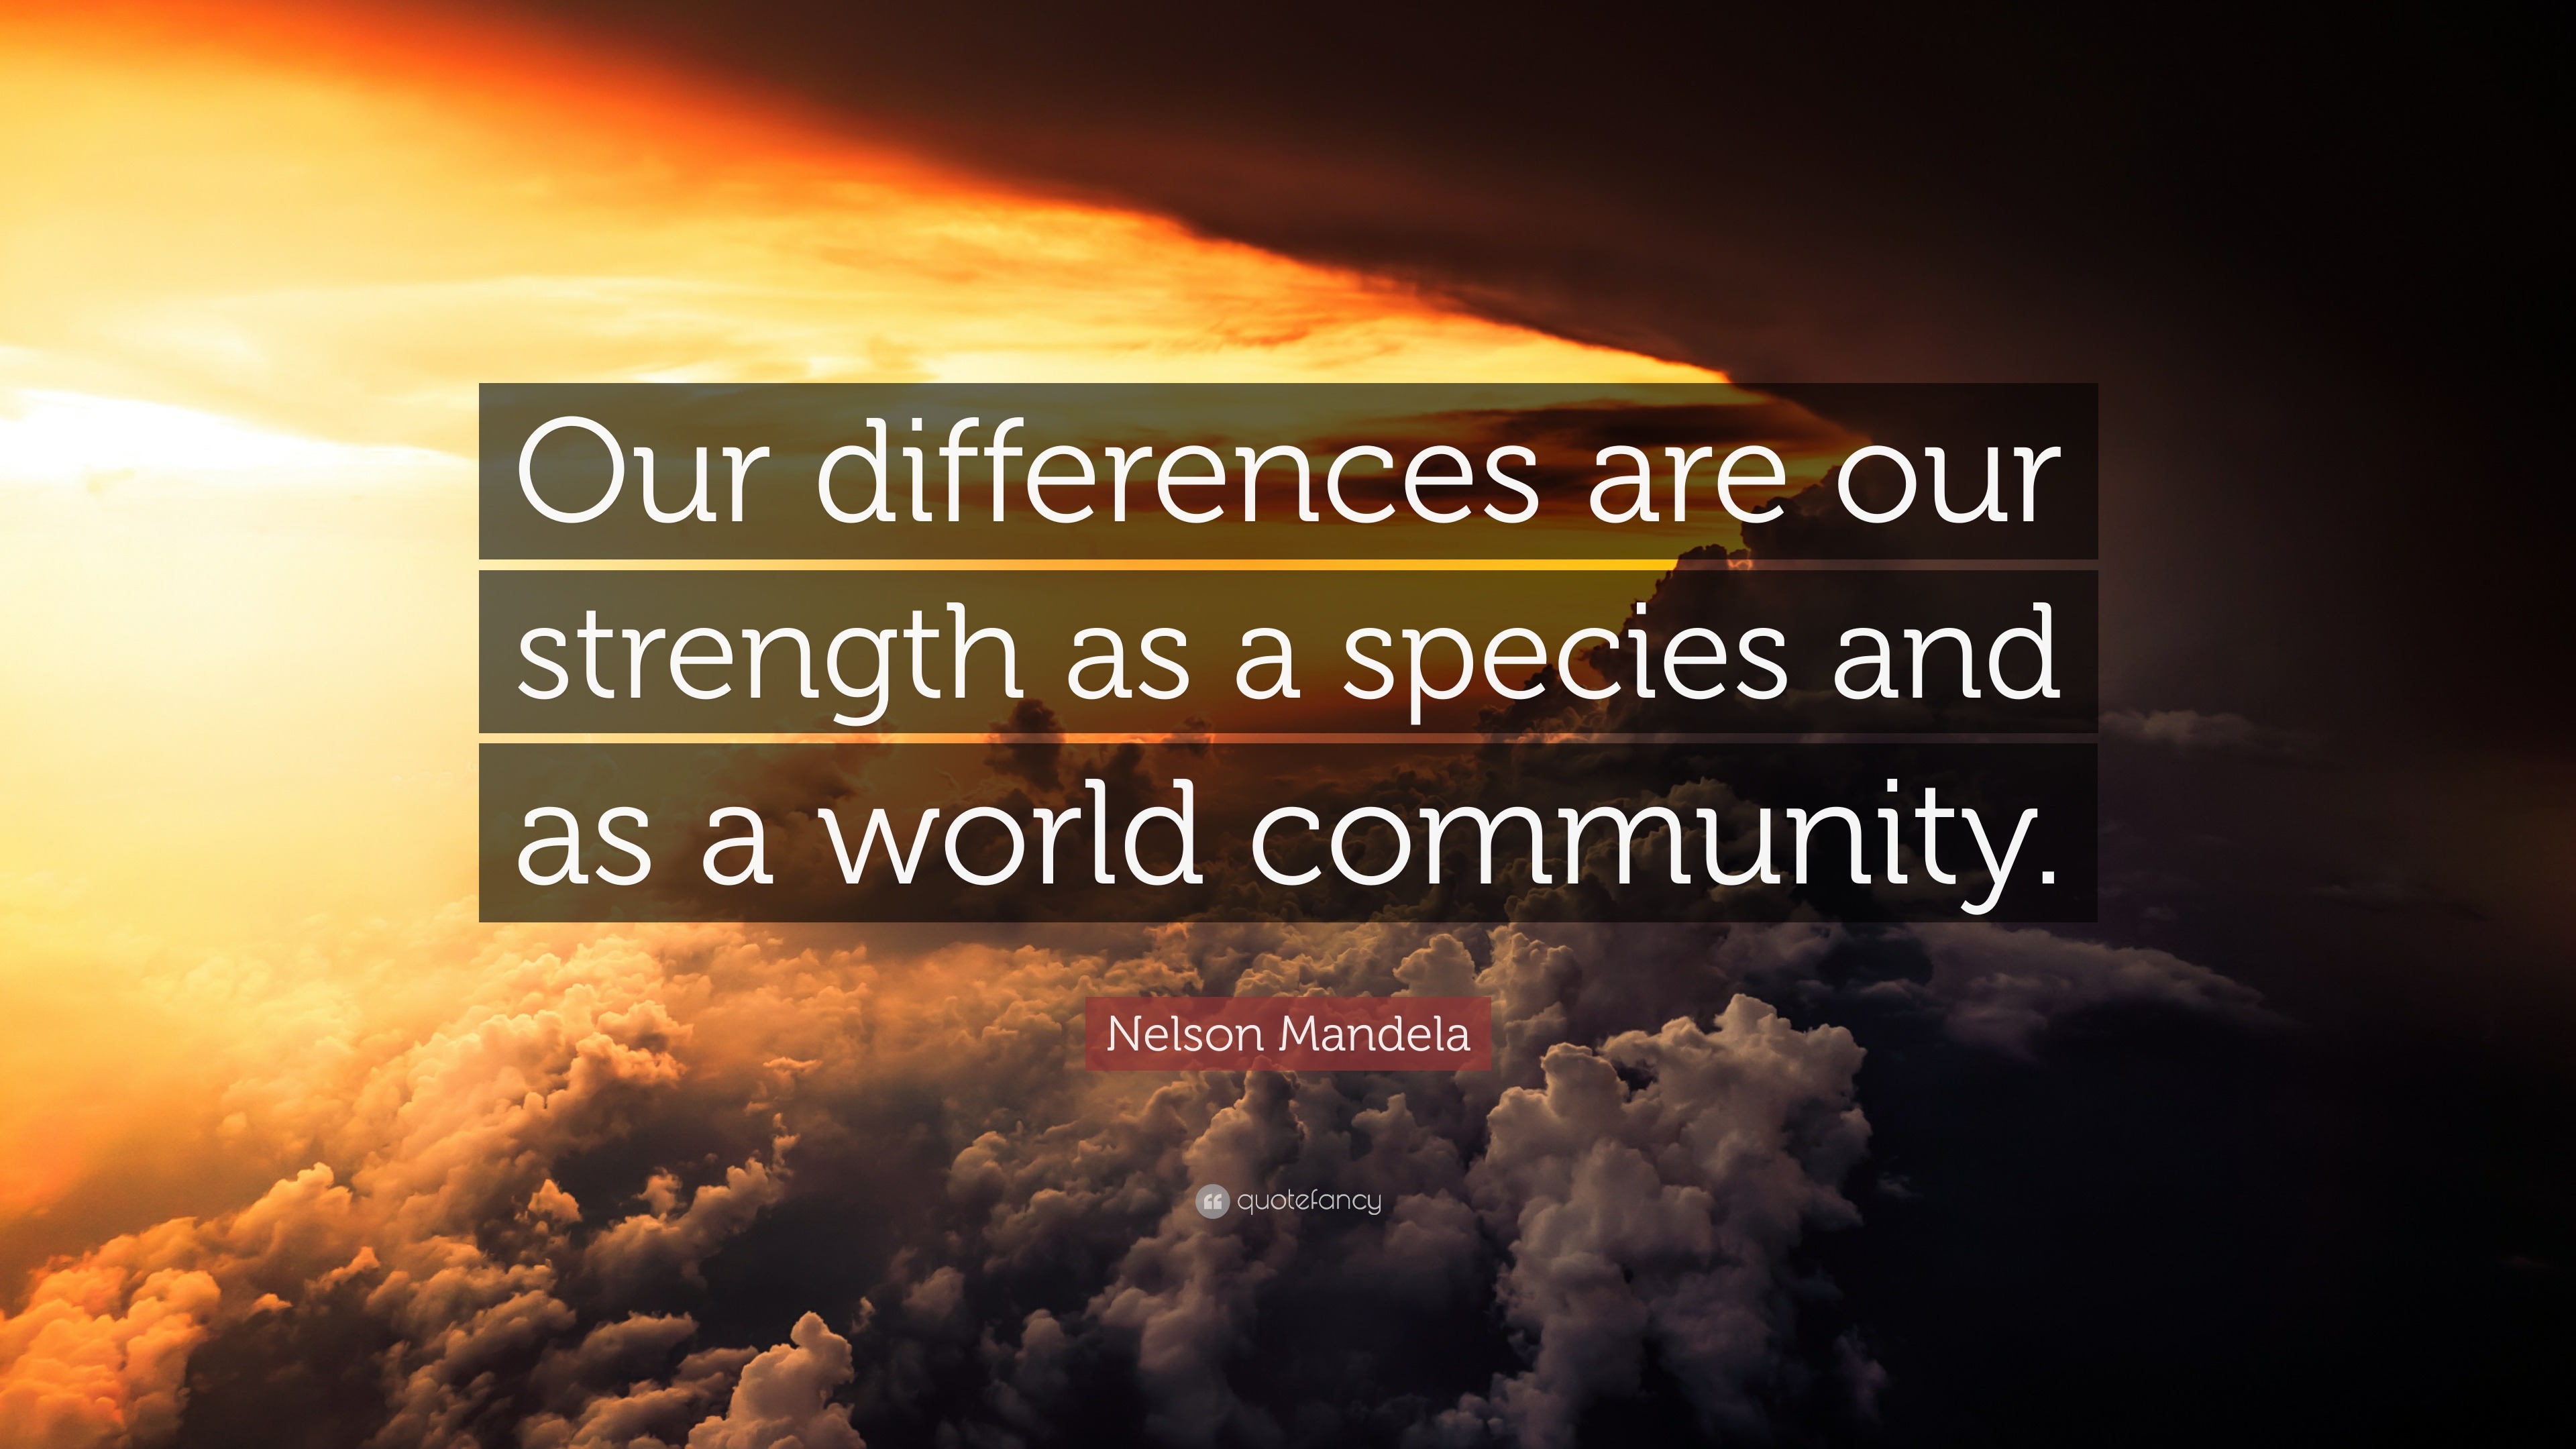 Nelson Mandela Quote “Our differences are our strength as a species